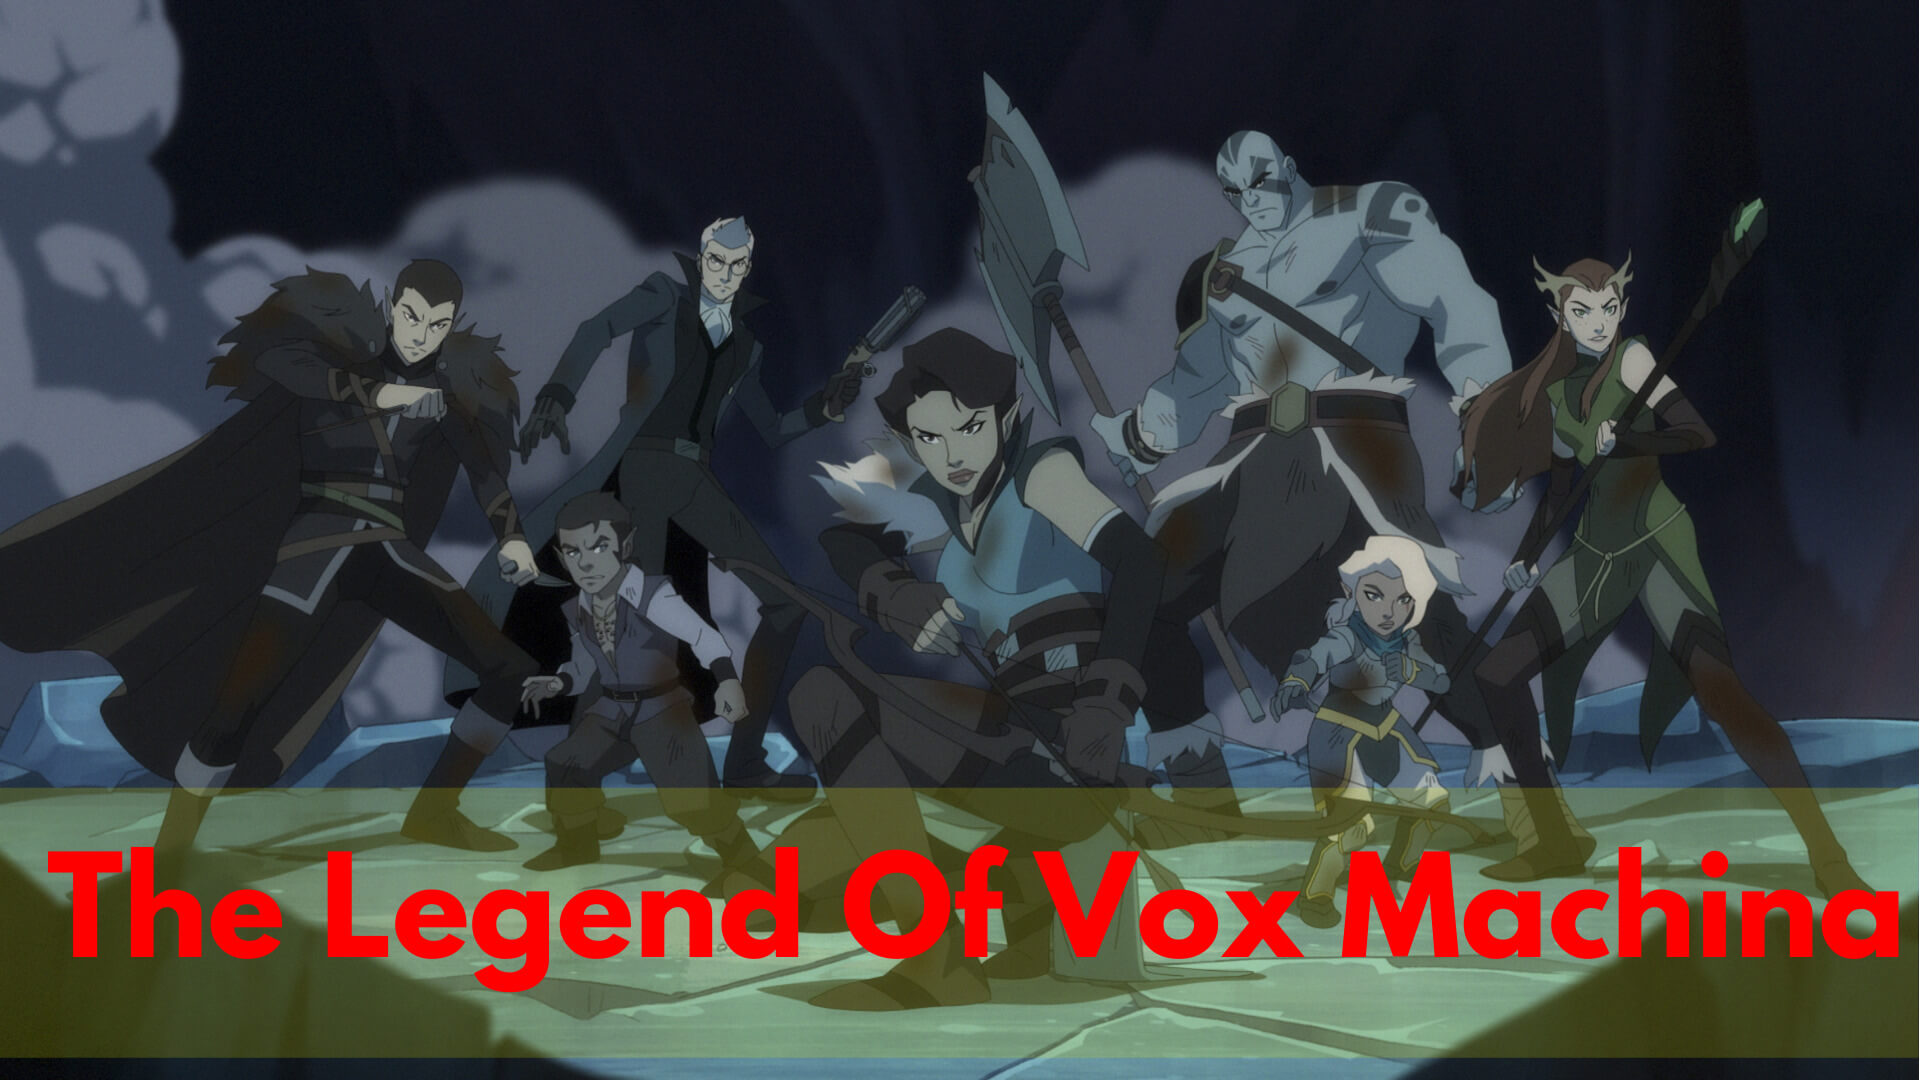 Is There Any News The Legend Of Vox Machina Trailer?